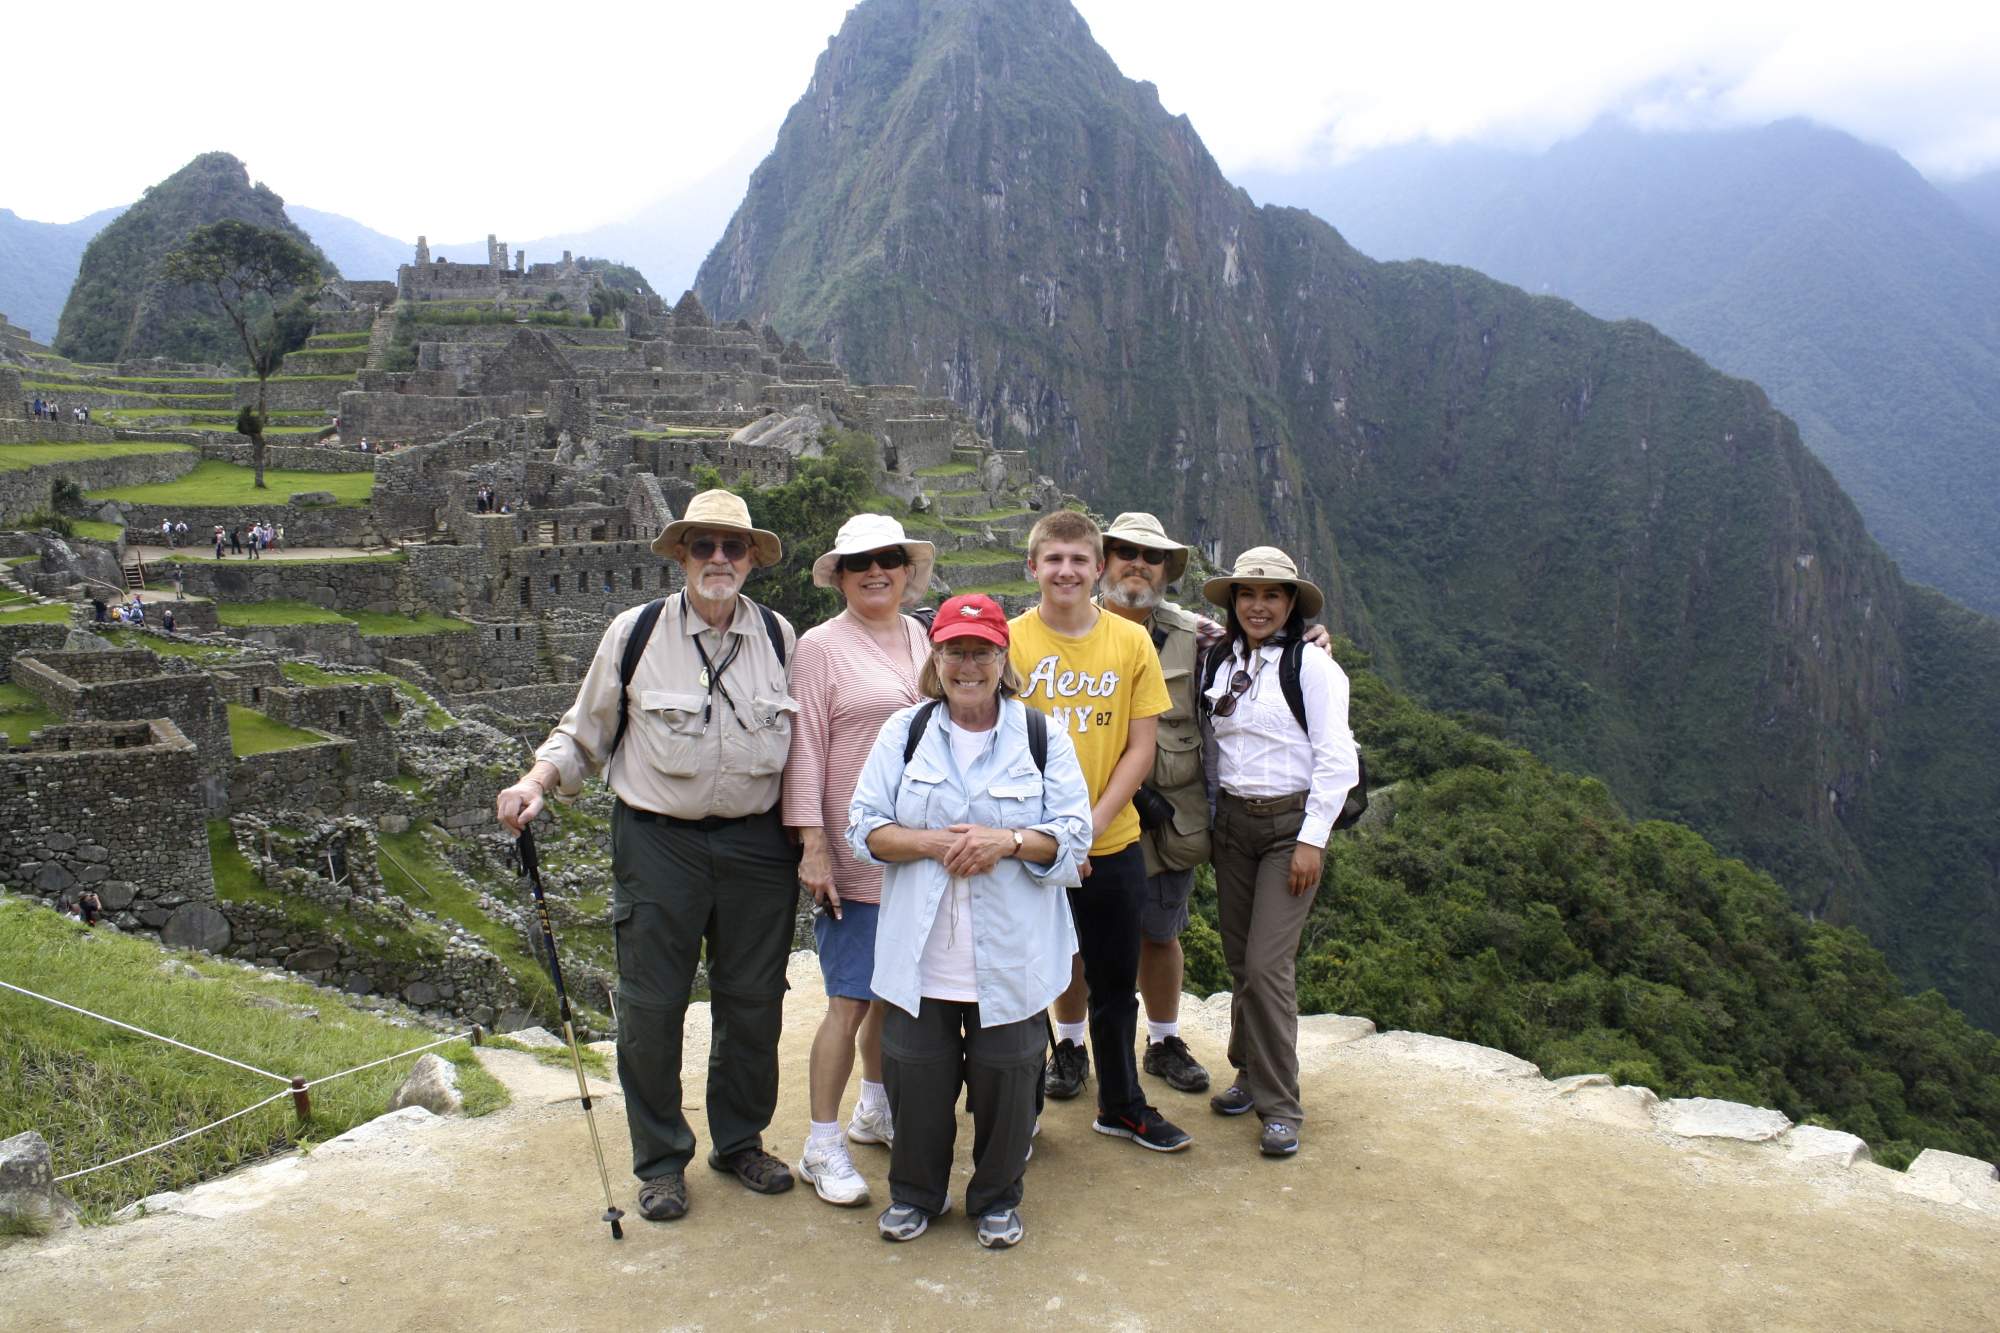 Family posing in front of Machu Picchu